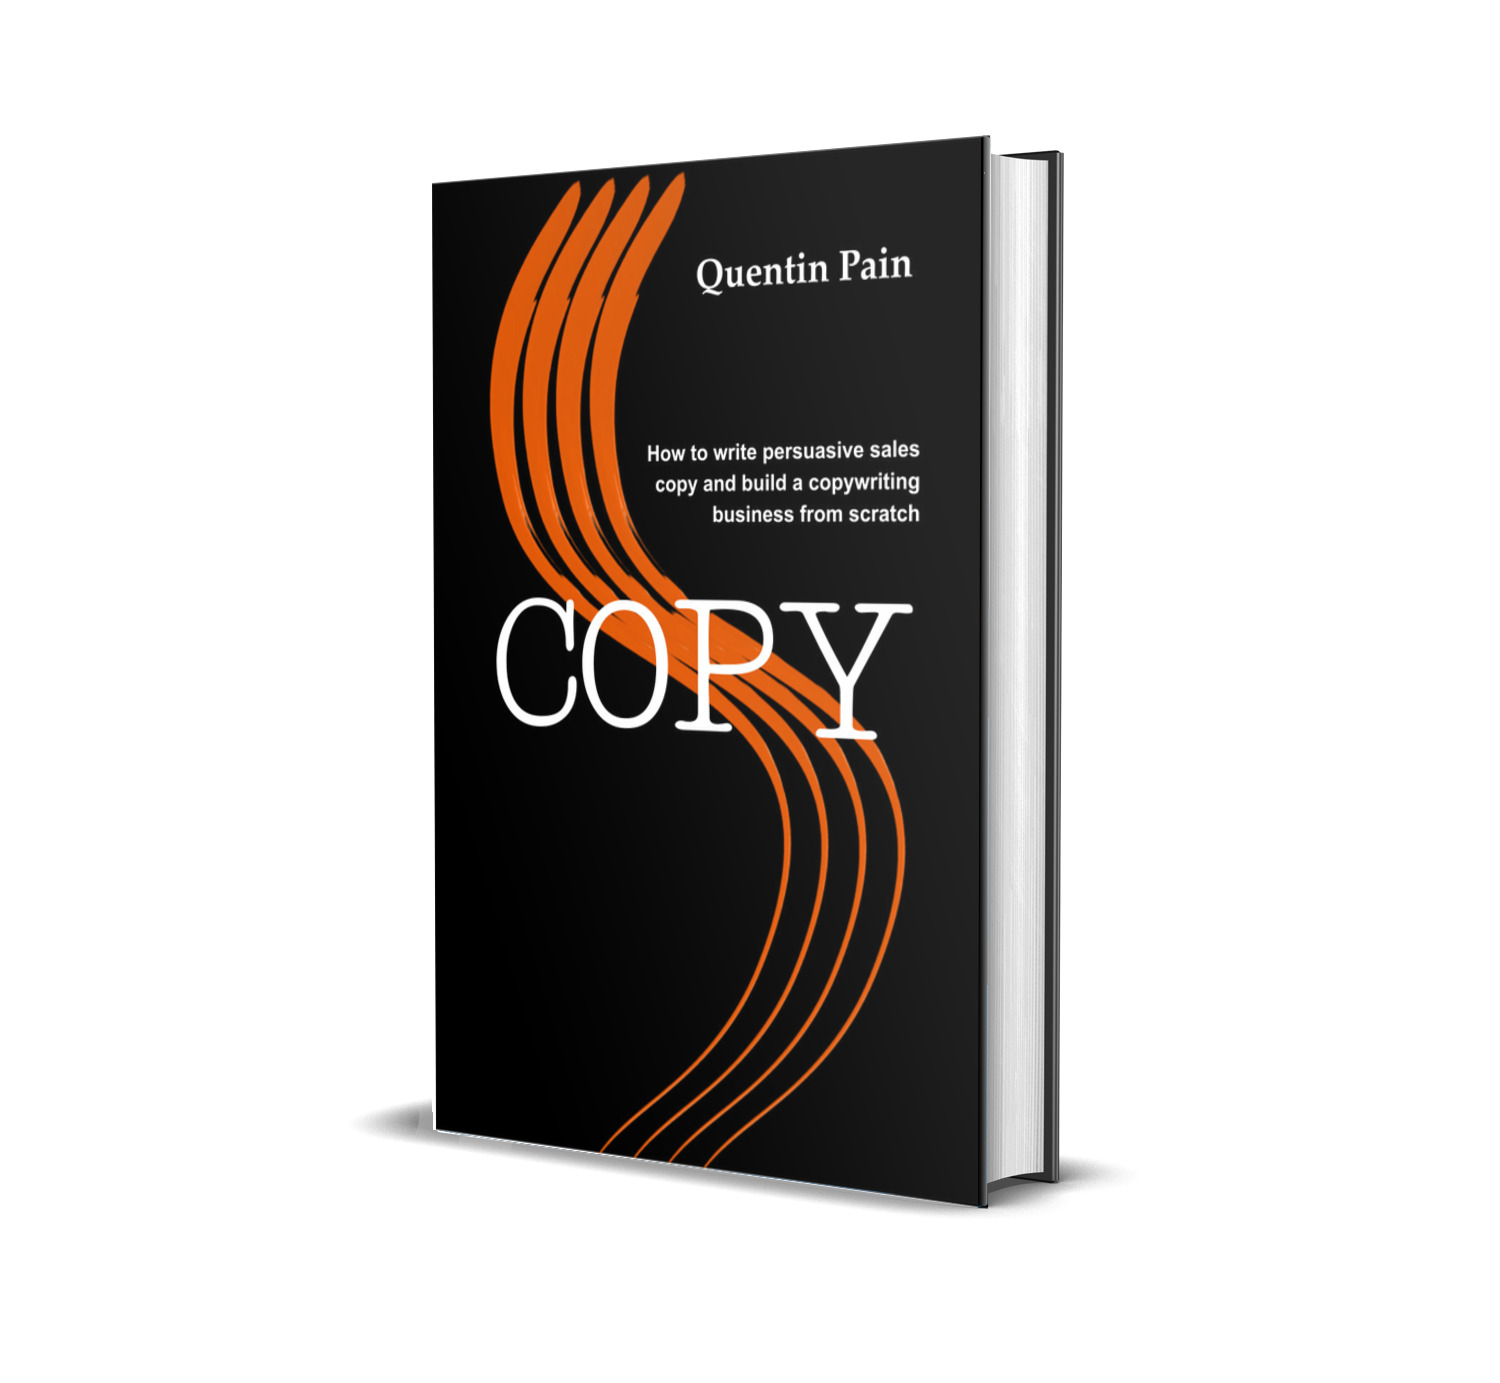 COPY - the new book on copywriting from Quentin Pain